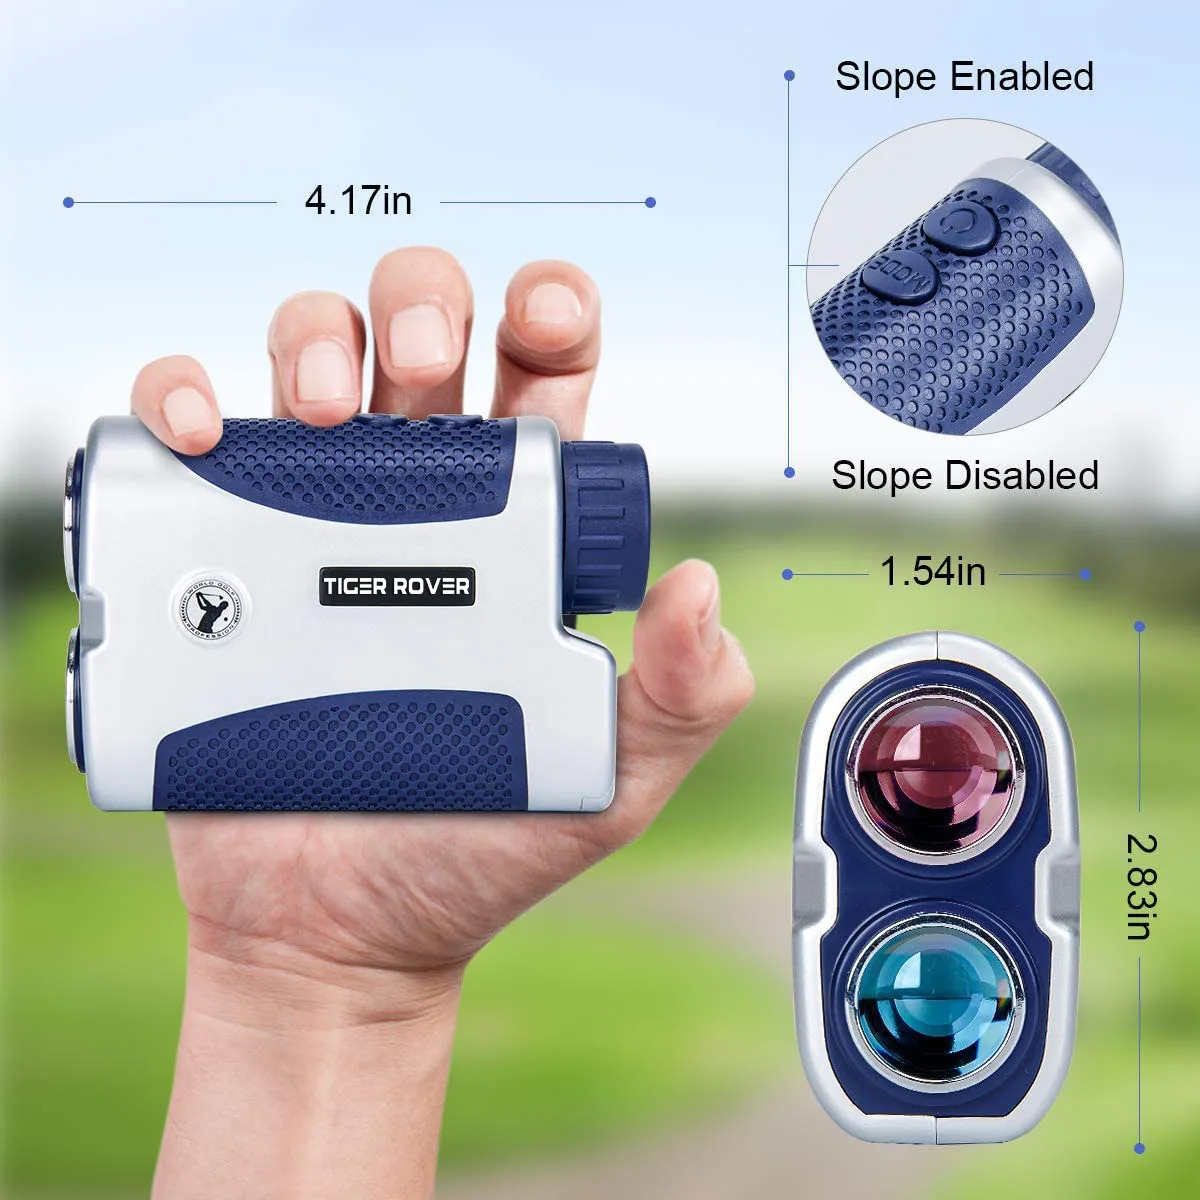 

TIGER ROVER MINI optical 1000M Forestry Hunting fast measure accurate laser rangefinder waterproof